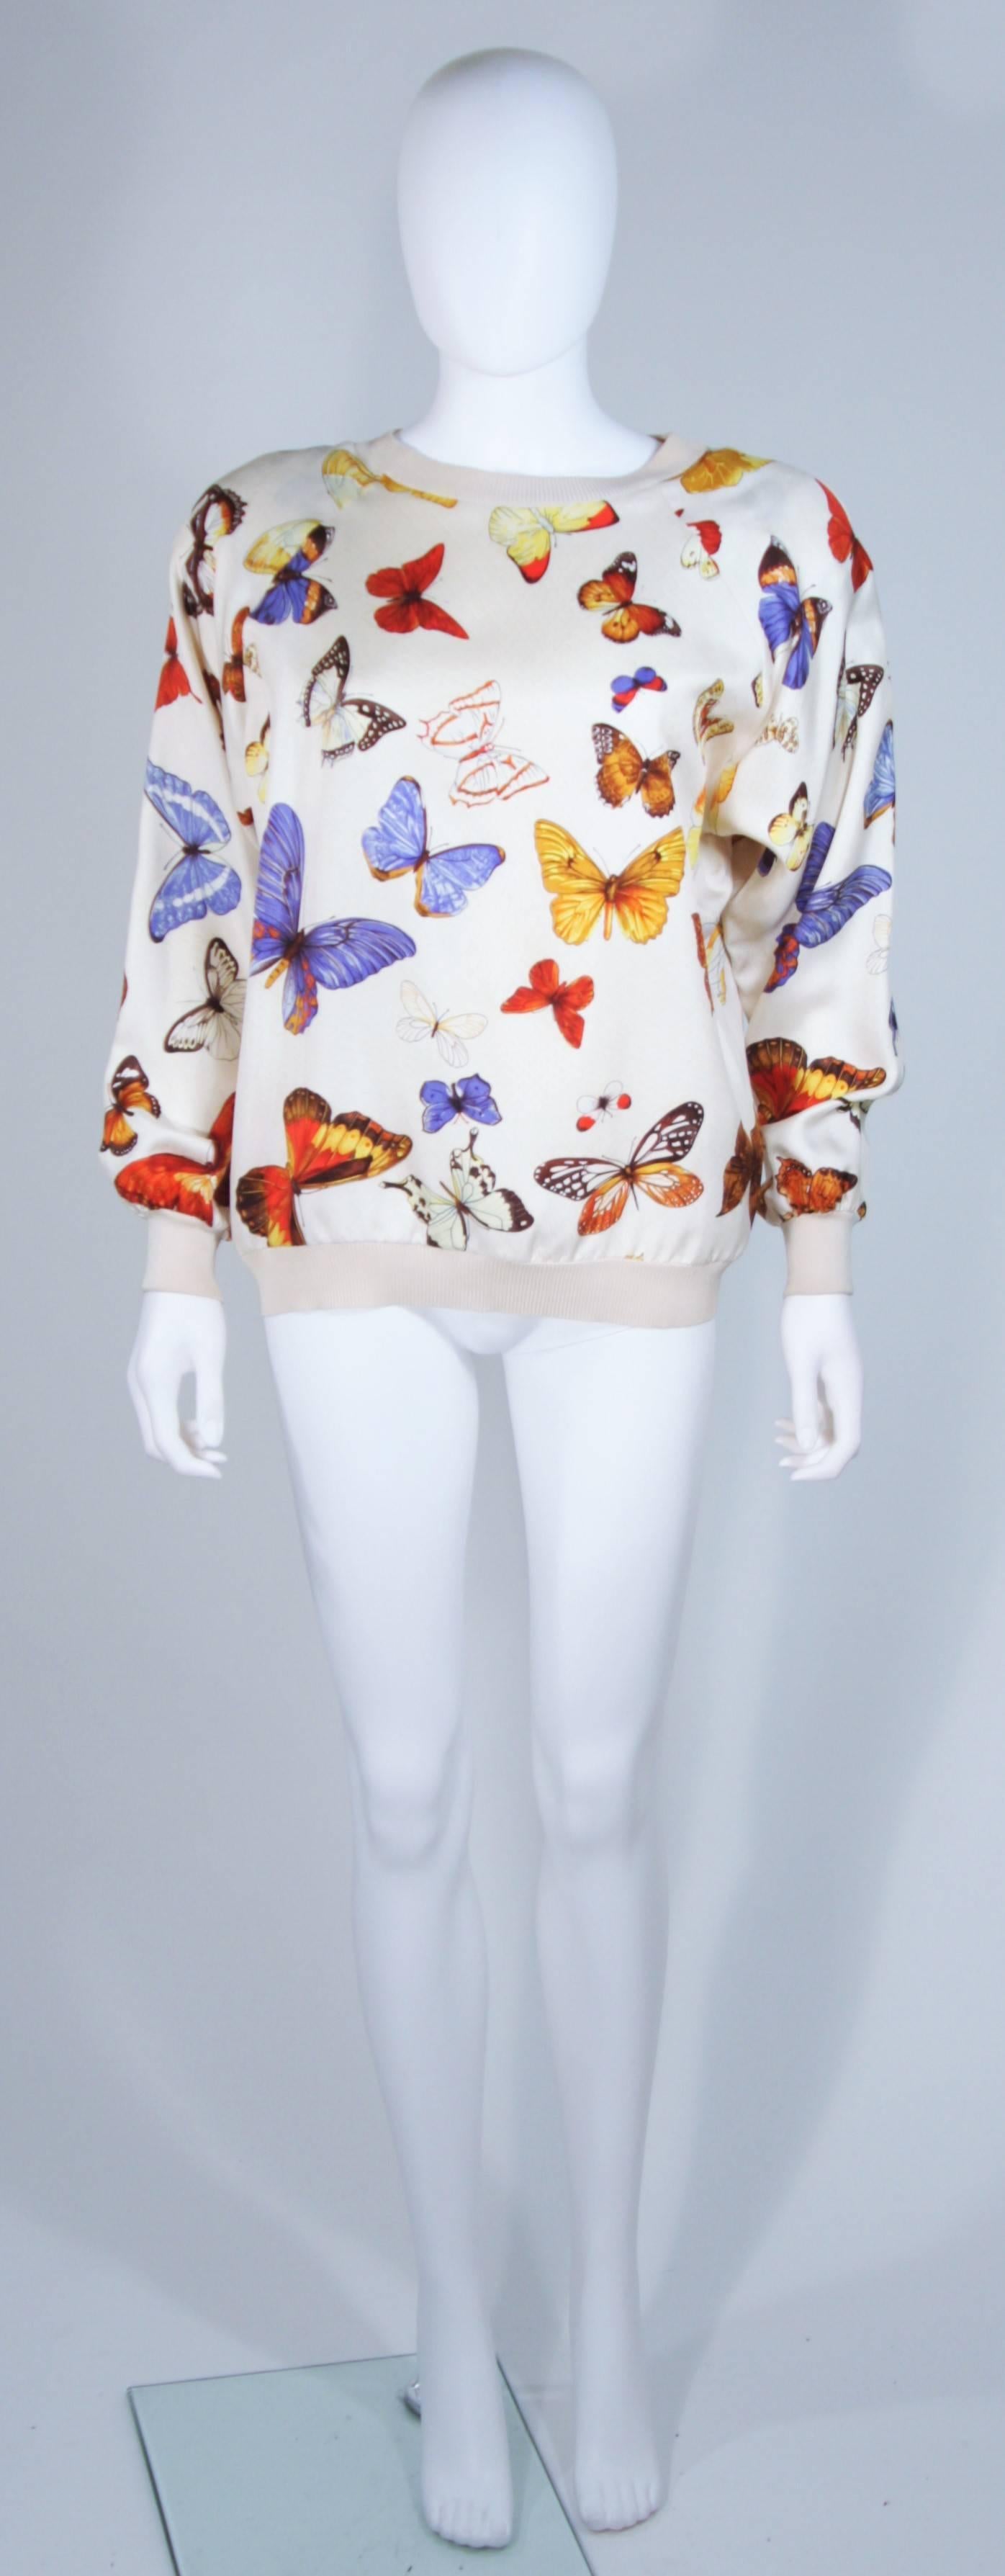  This Hermes design is available for viewing at our Beverly Hills Boutique. We offer a large selection of evening gowns and luxury garments. 

 This sweater is composed of a cream silk with butterfly print. The pullover style sweater features very